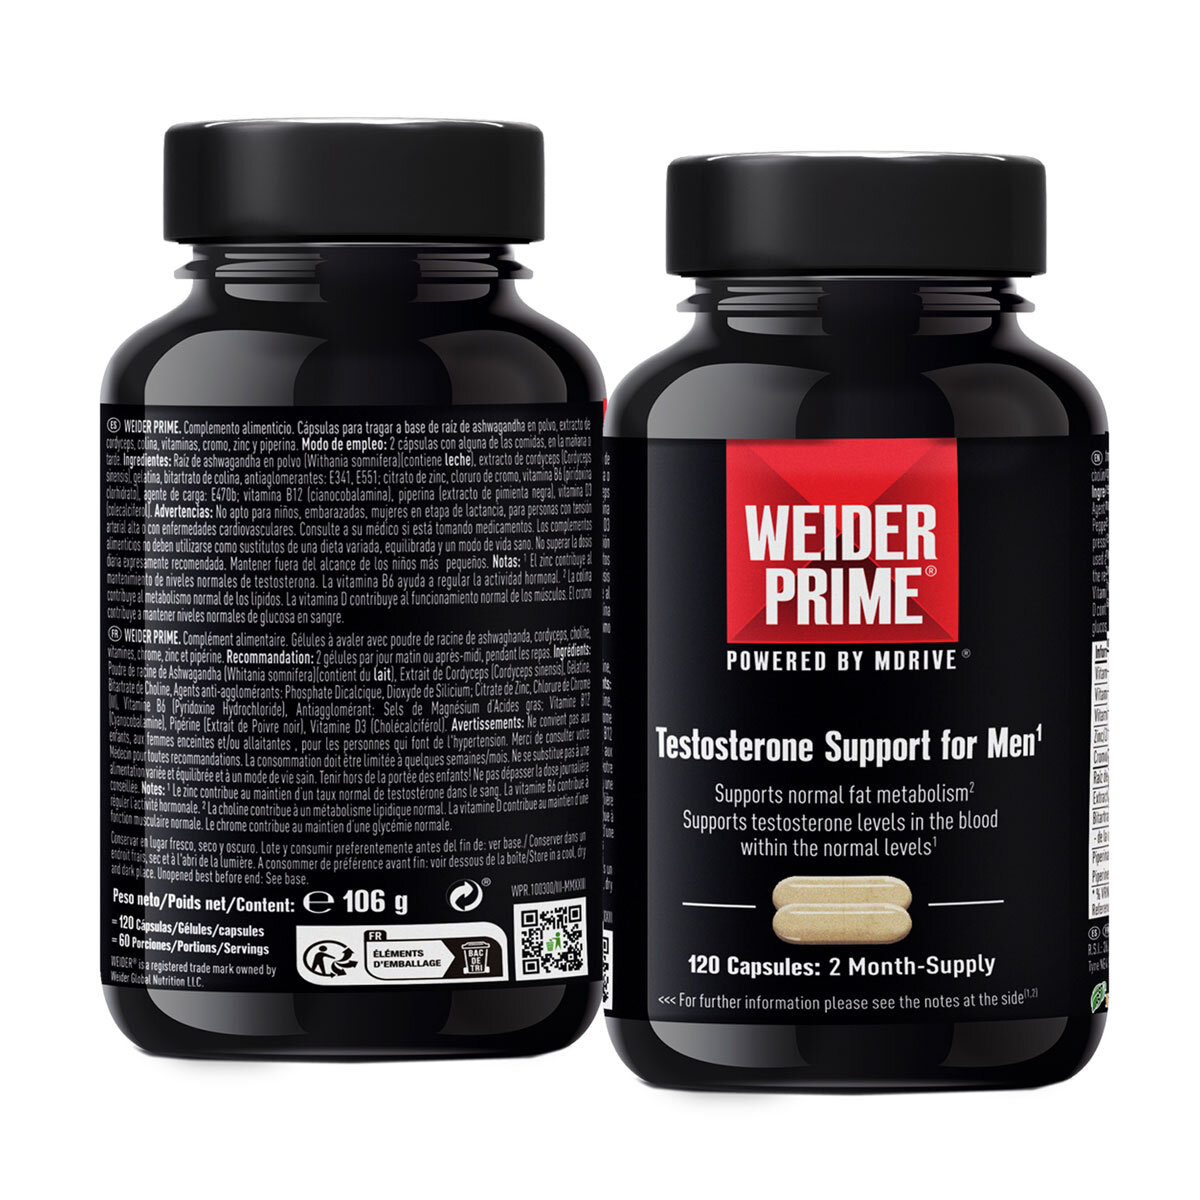 Weider Prime Testosterone front and back of bottle